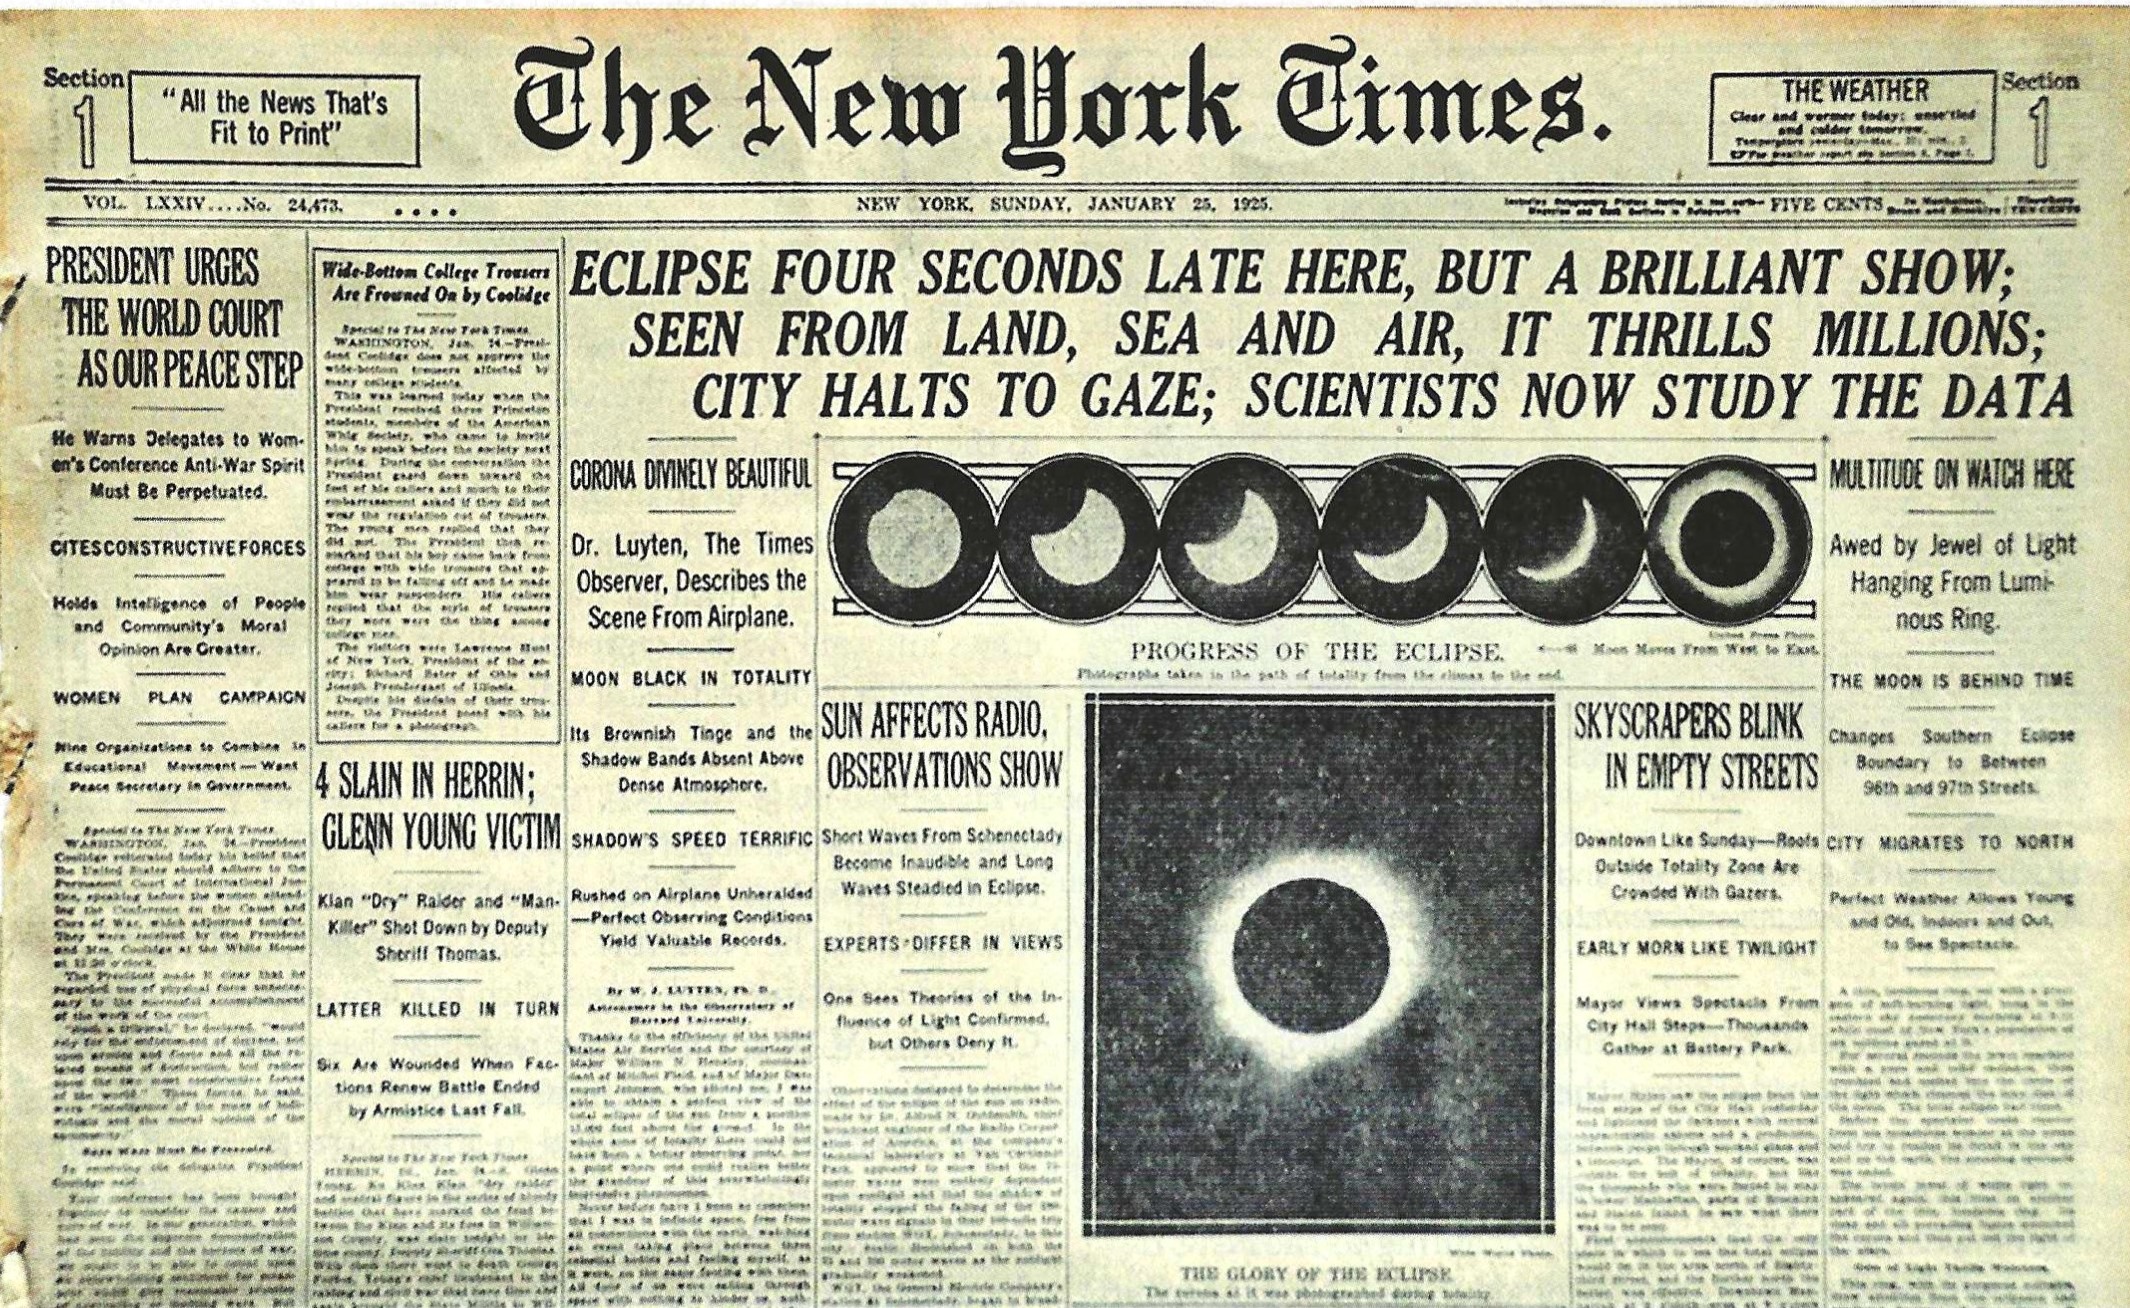 Front page of The New York Times of January 25, 1925 displaying a banner headline about the total solar eclipse that passed over New York City the previous day. The 